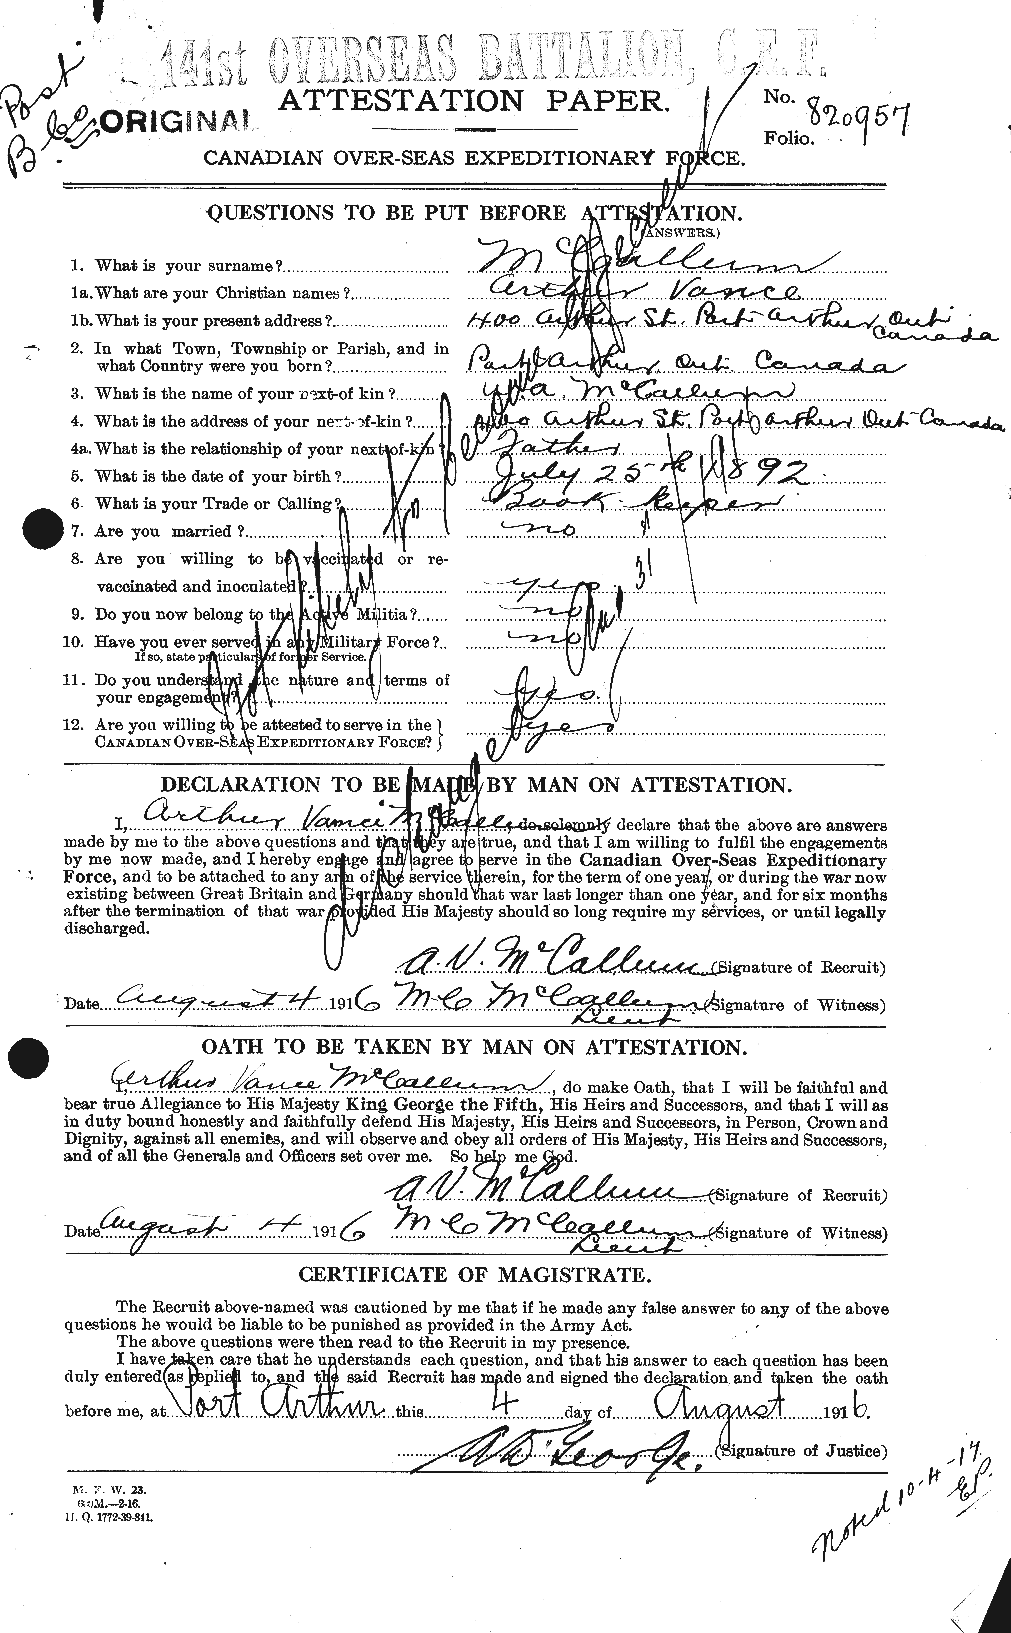 Personnel Records of the First World War - CEF 131666a